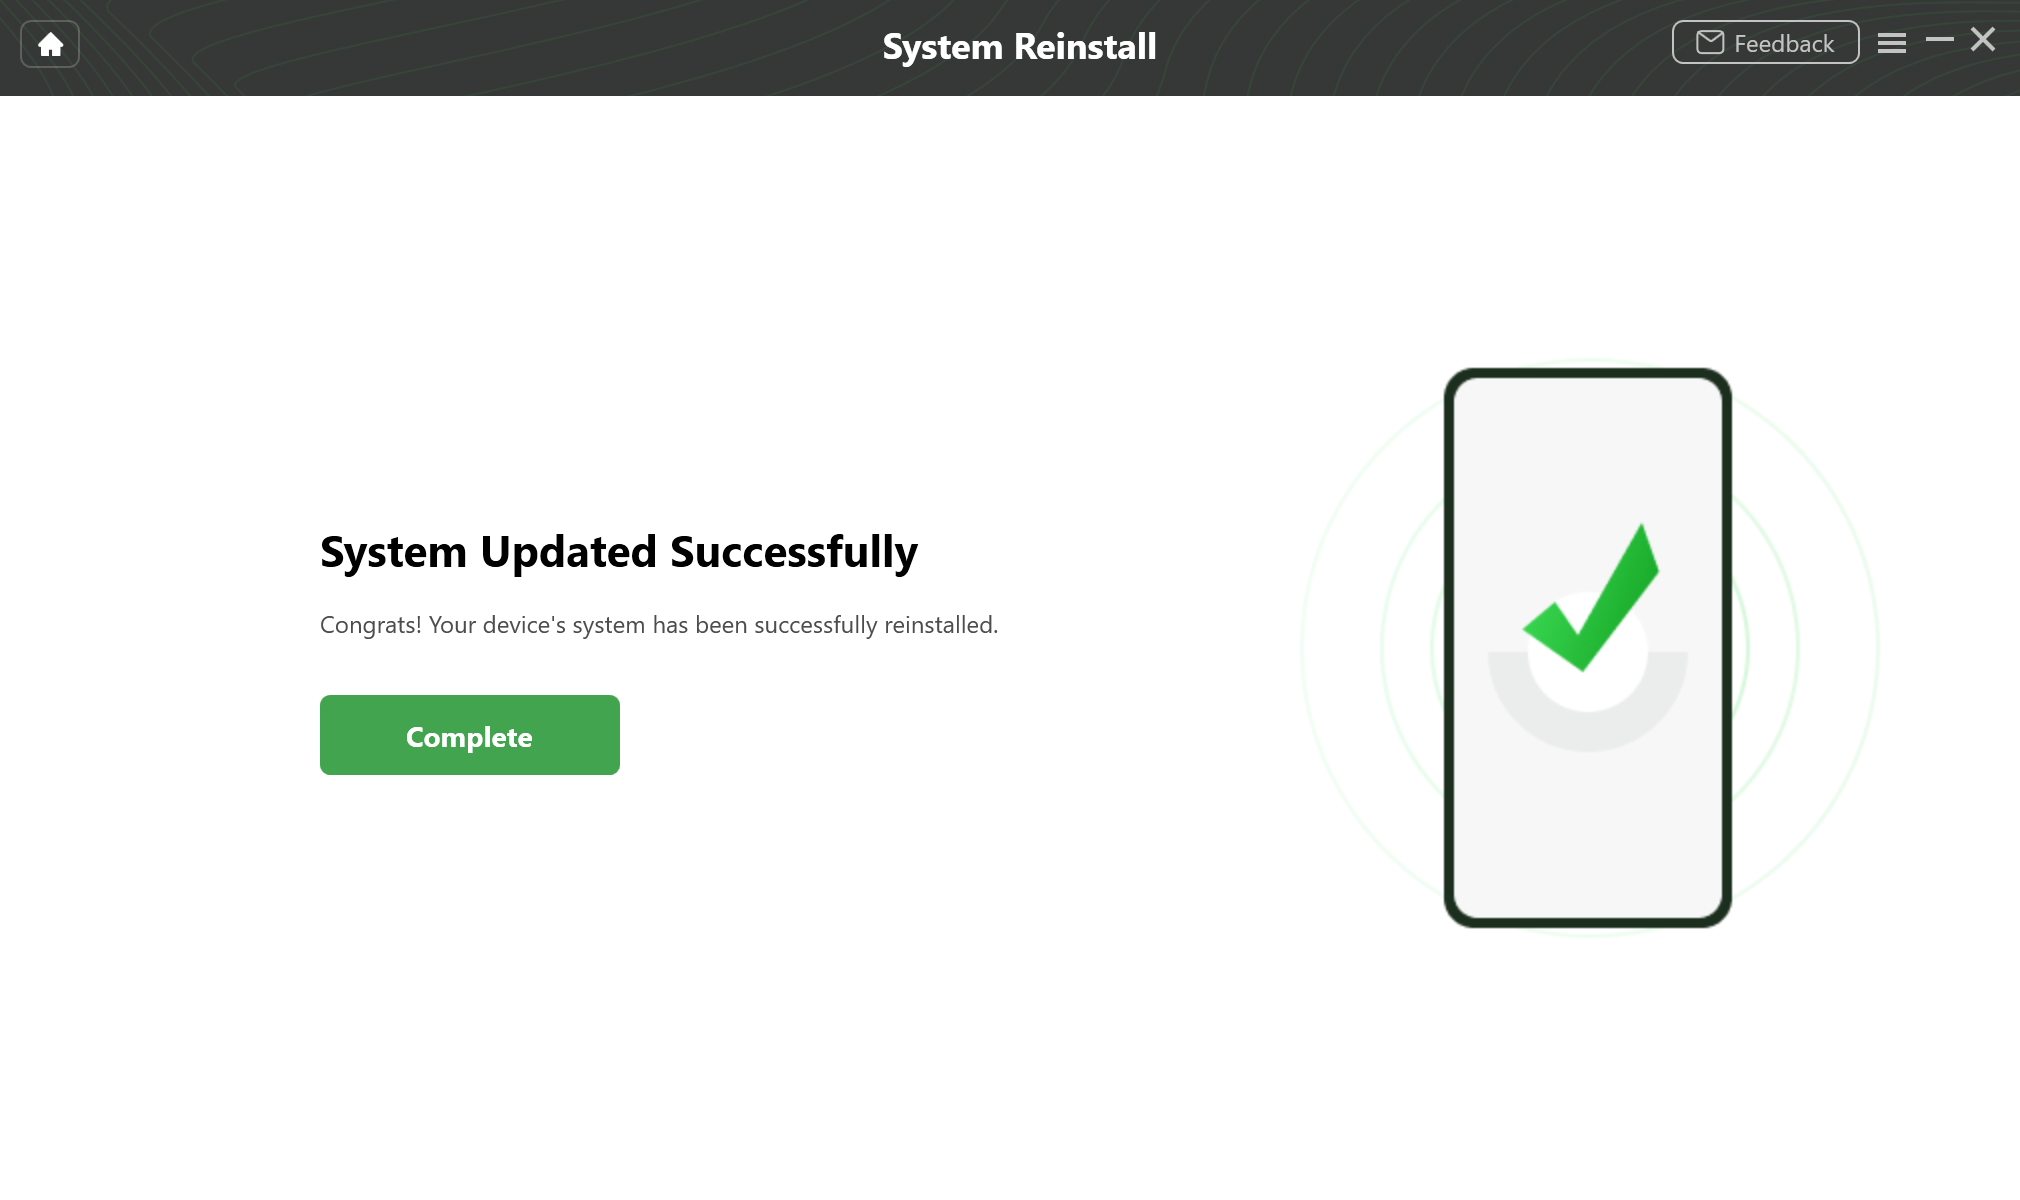 System Reinstallation Completed